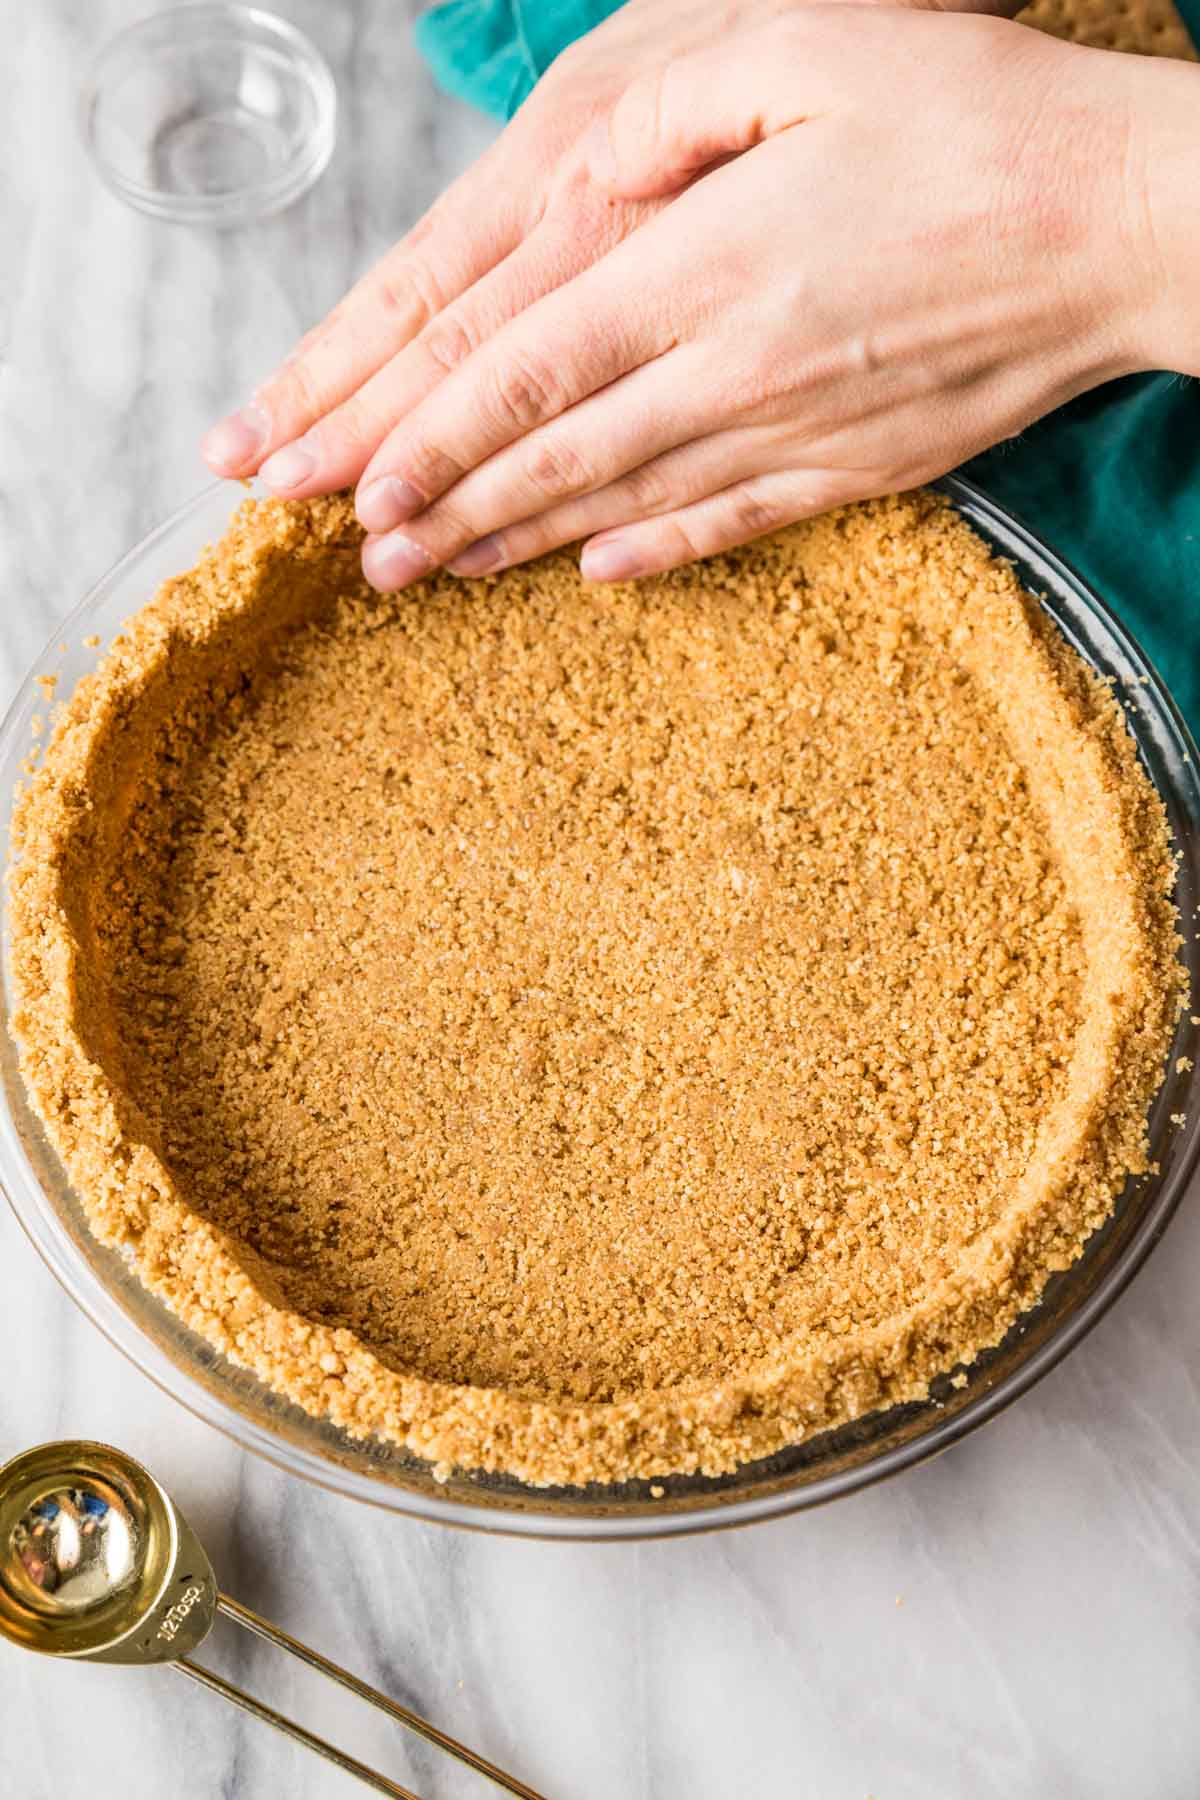 Pressing graham cracker crumbs into a glass pie plate.